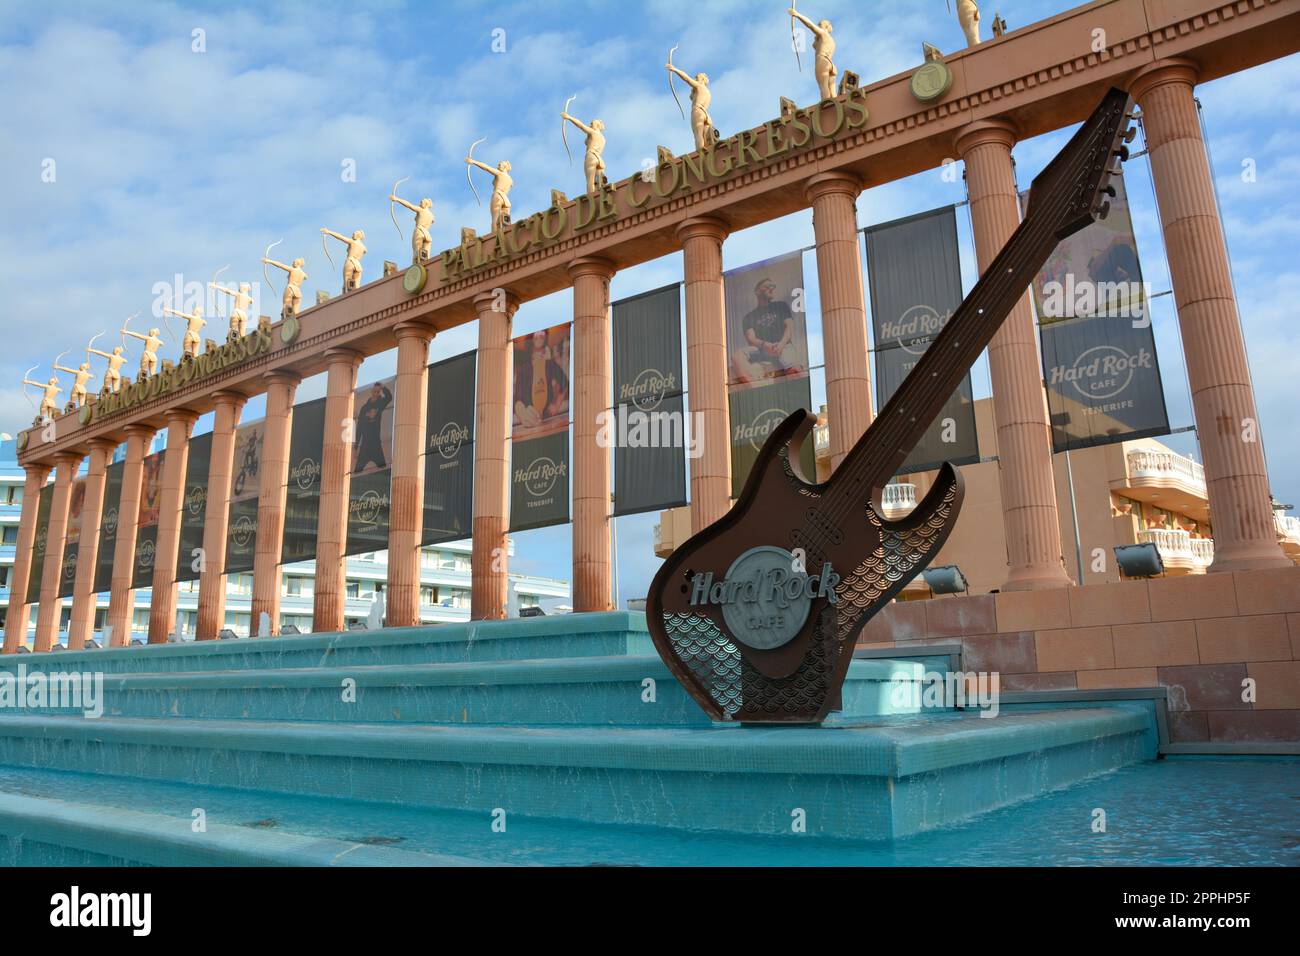 Hard Rock Cafe, Playa de la Americas, Tenerife, Spain August 12, 2022 - Building exterior with guitar , fountain and some archers  figure Stock Photo